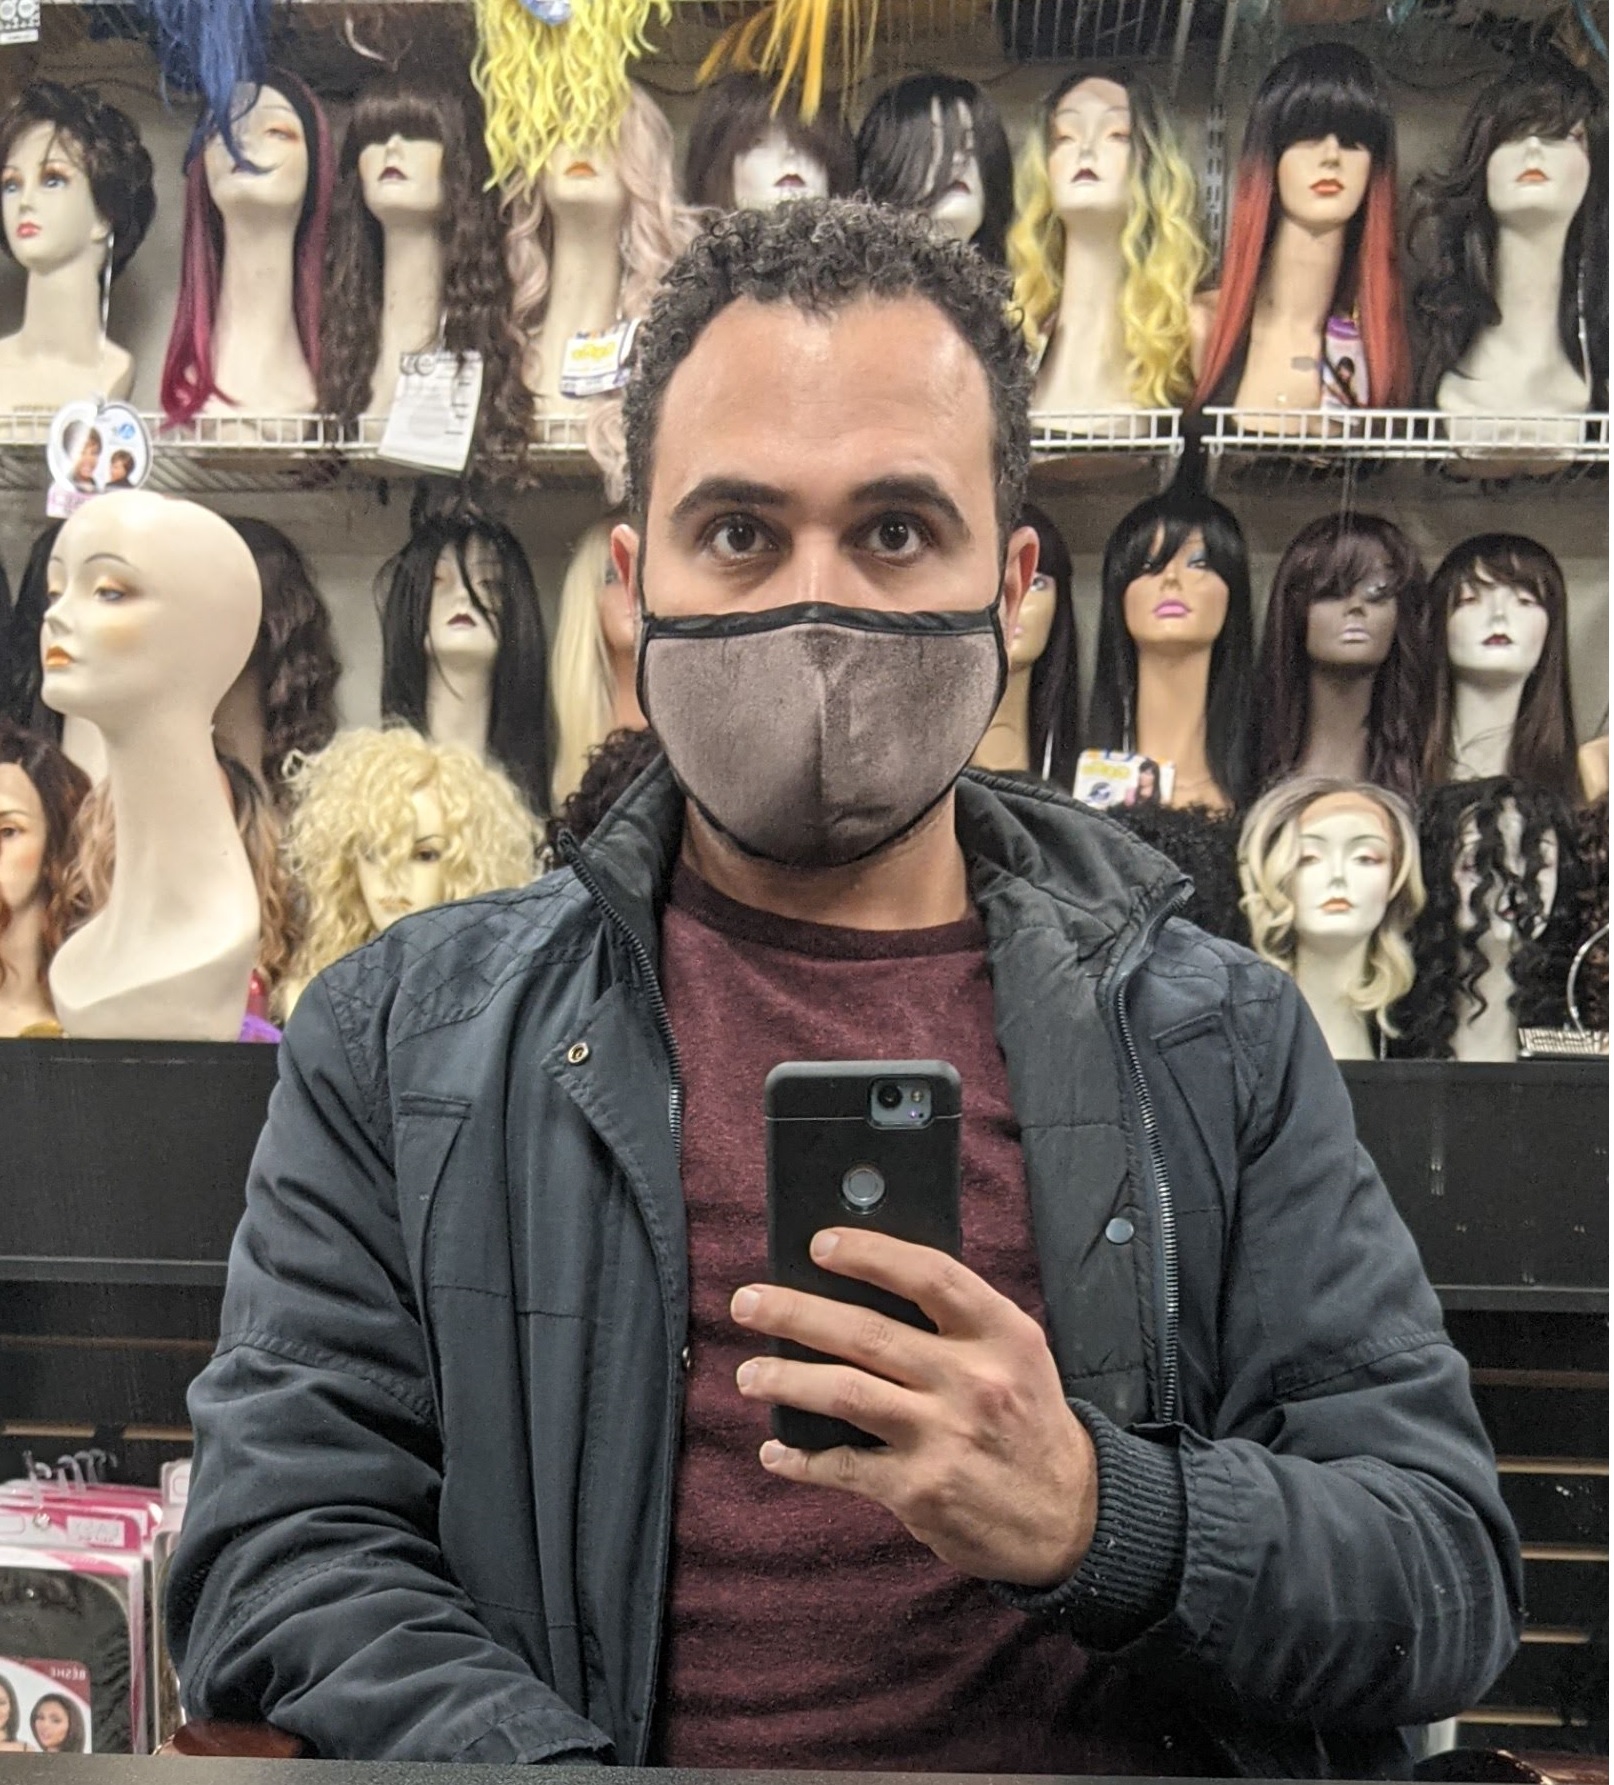 Image of Ahmed Naji in front of a wall of wig mannequins, taken as a mirror selfie.